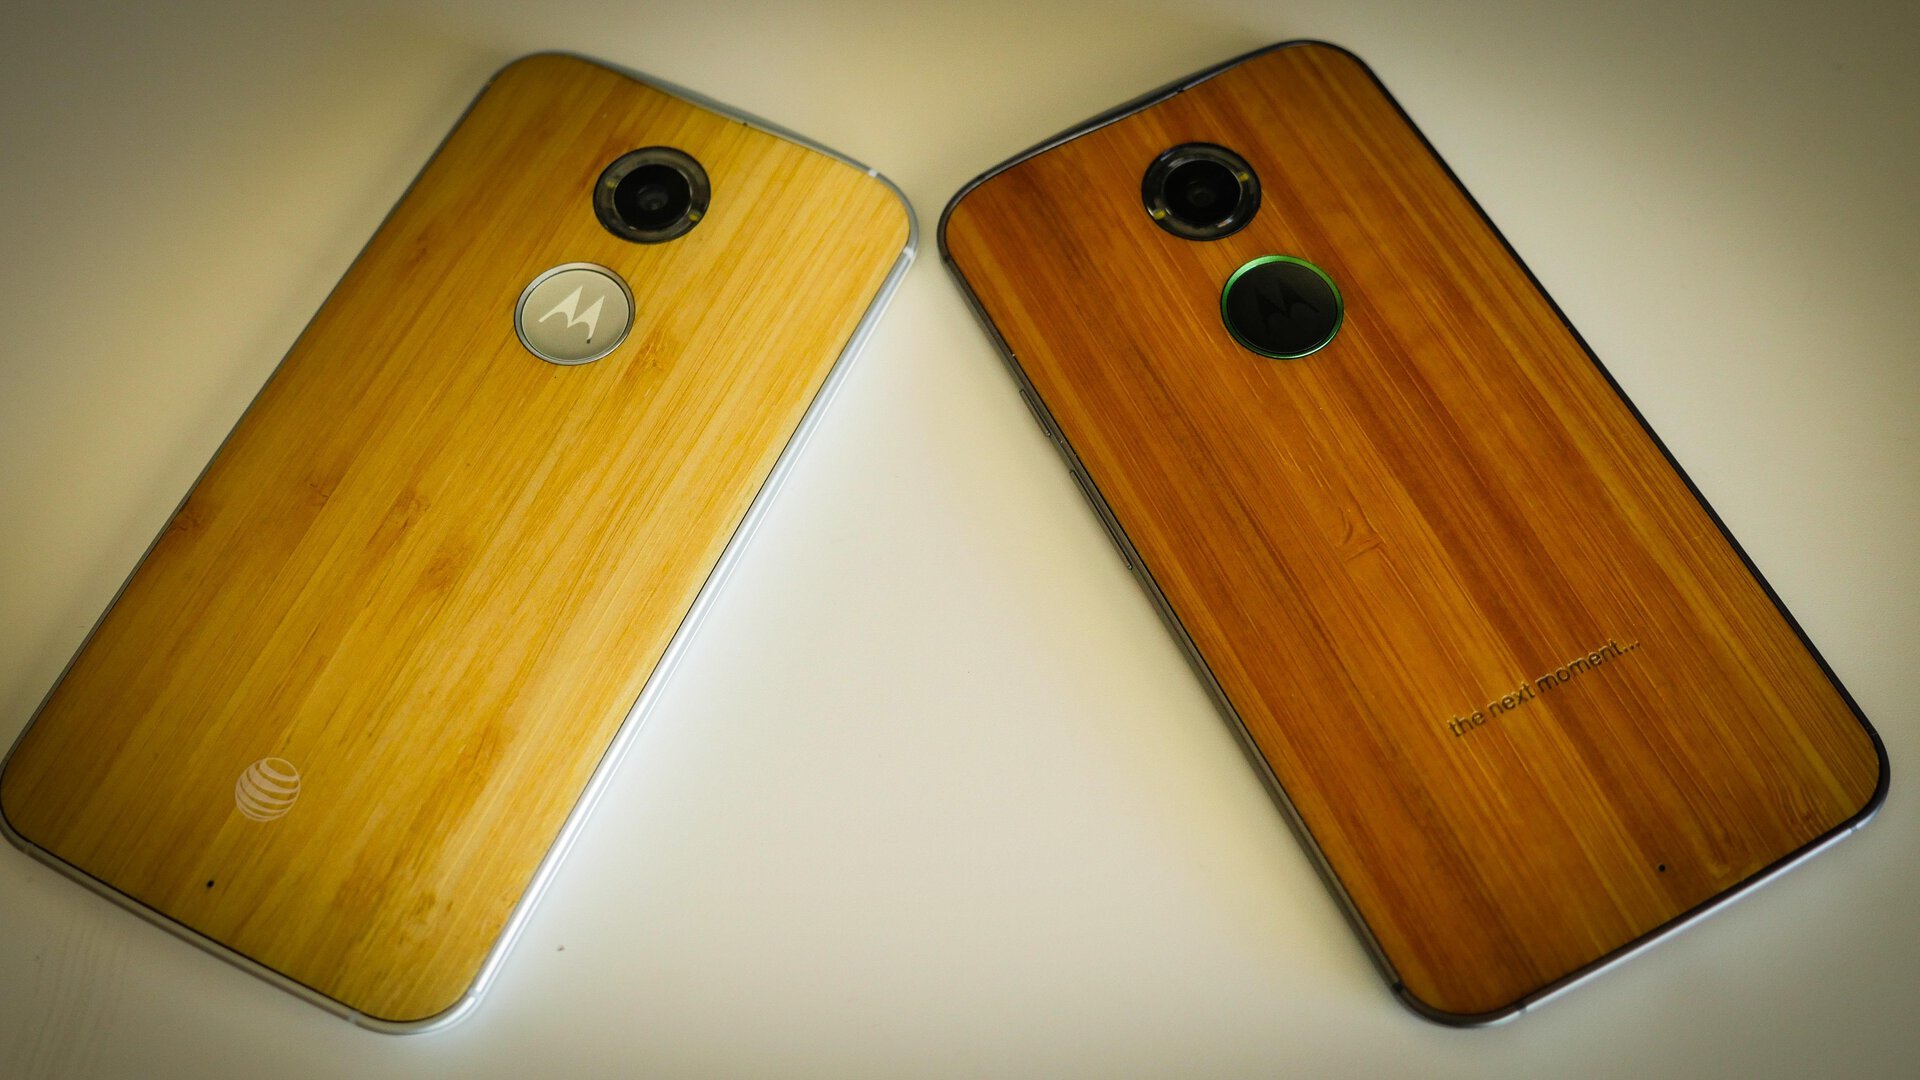 moto x 2014 first impressions (5 of 18)